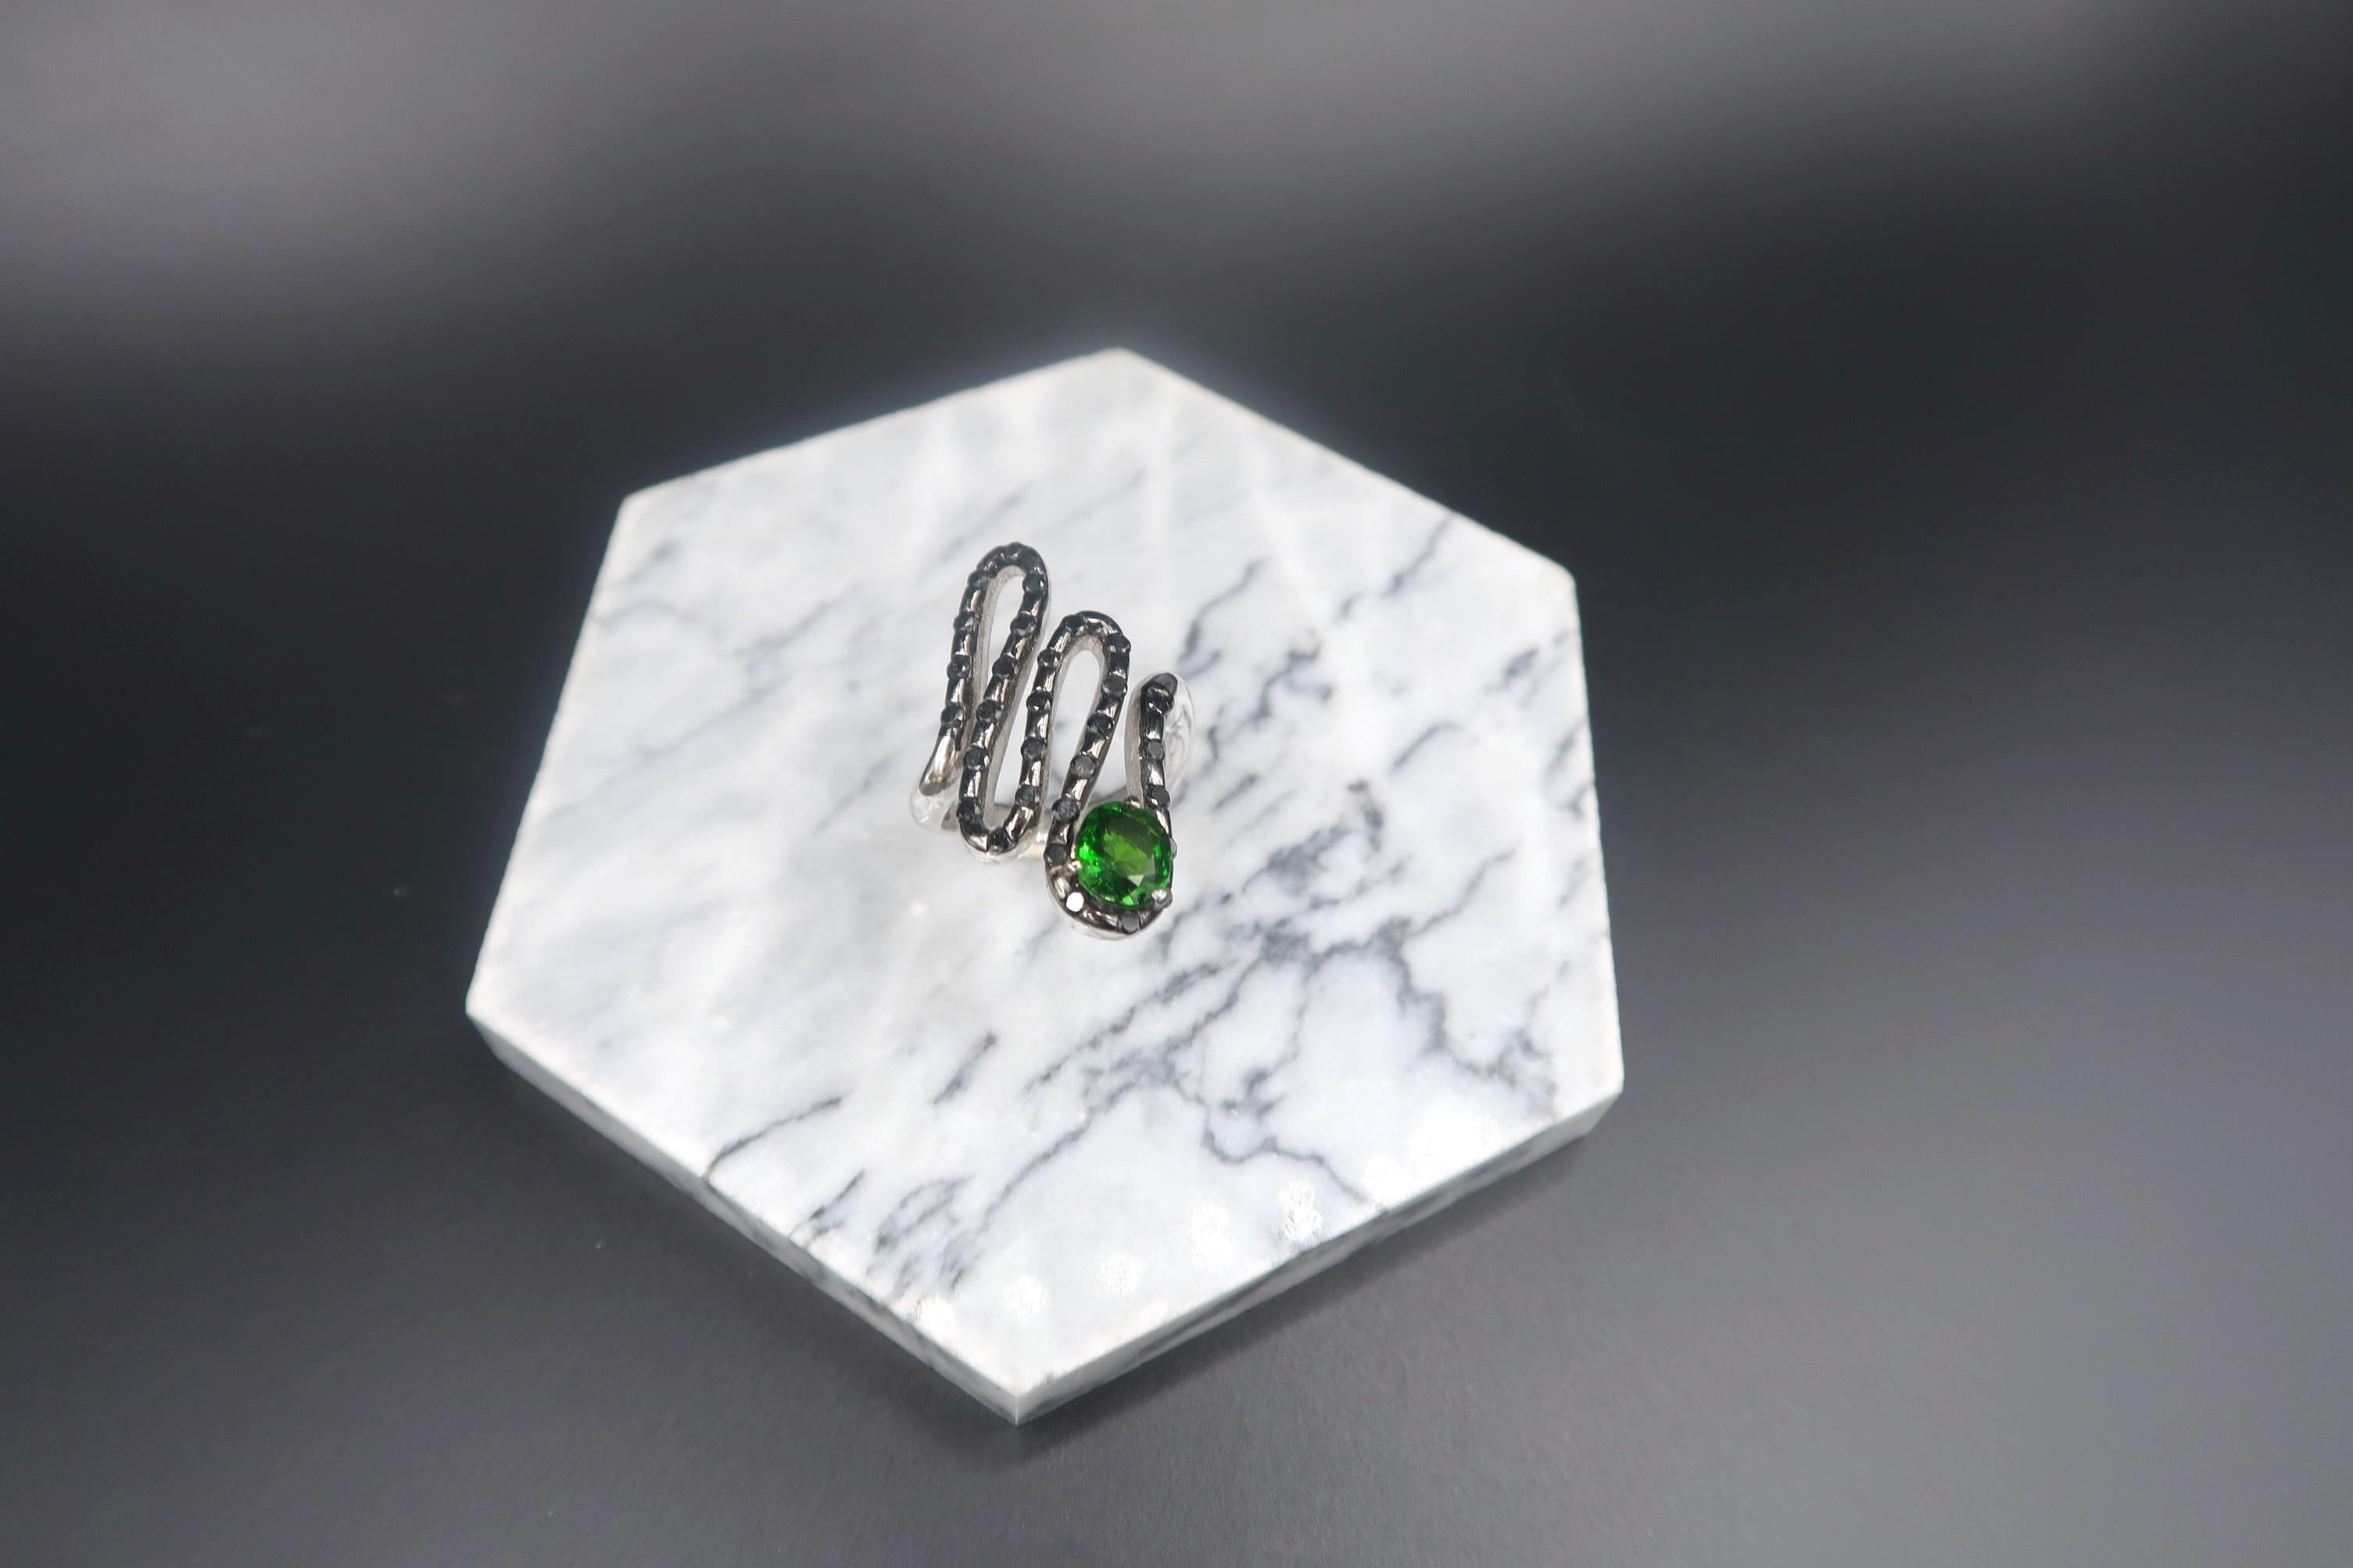 Nebuly/ Curved Line Black Diamond and Tsavorite Ring in 18K Gold Setting

Tsavorite: 3.90cts.
Black Diamond: 0.77ct.
Gold: 18K Gold 12.69g.

Ring size: 52.5
Please let us know should you wish to have the ring resized.